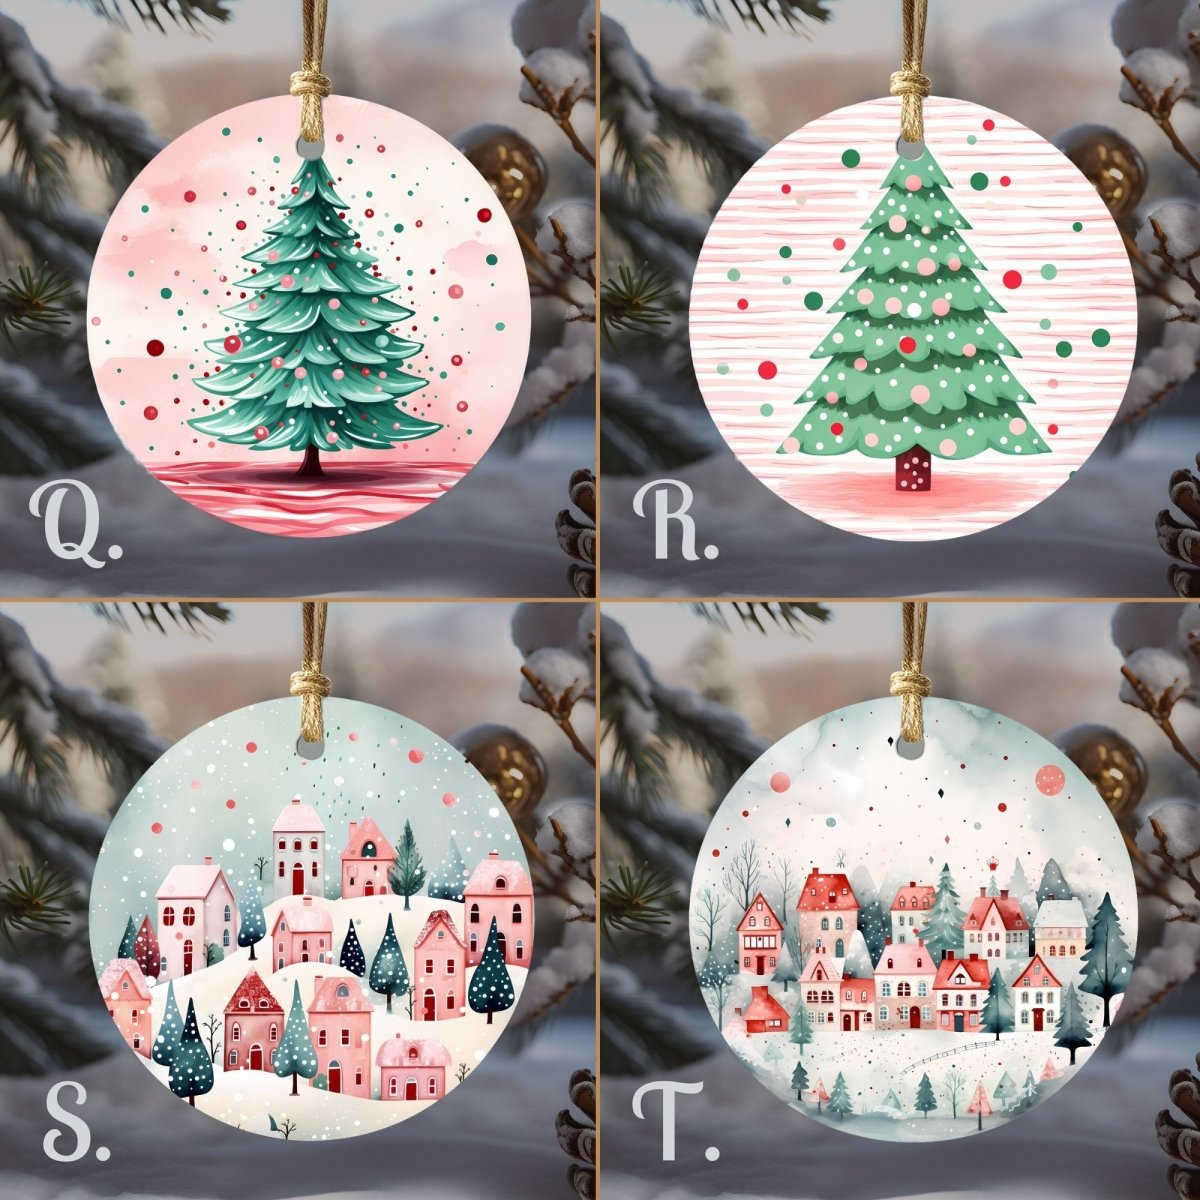 Cute Christmas Ornaments Set of 20 Round Ceramic Ornaments Printed Cute Animal Motifs Pink Mint Festive Christmas Tree Decoration - Everything Pixel